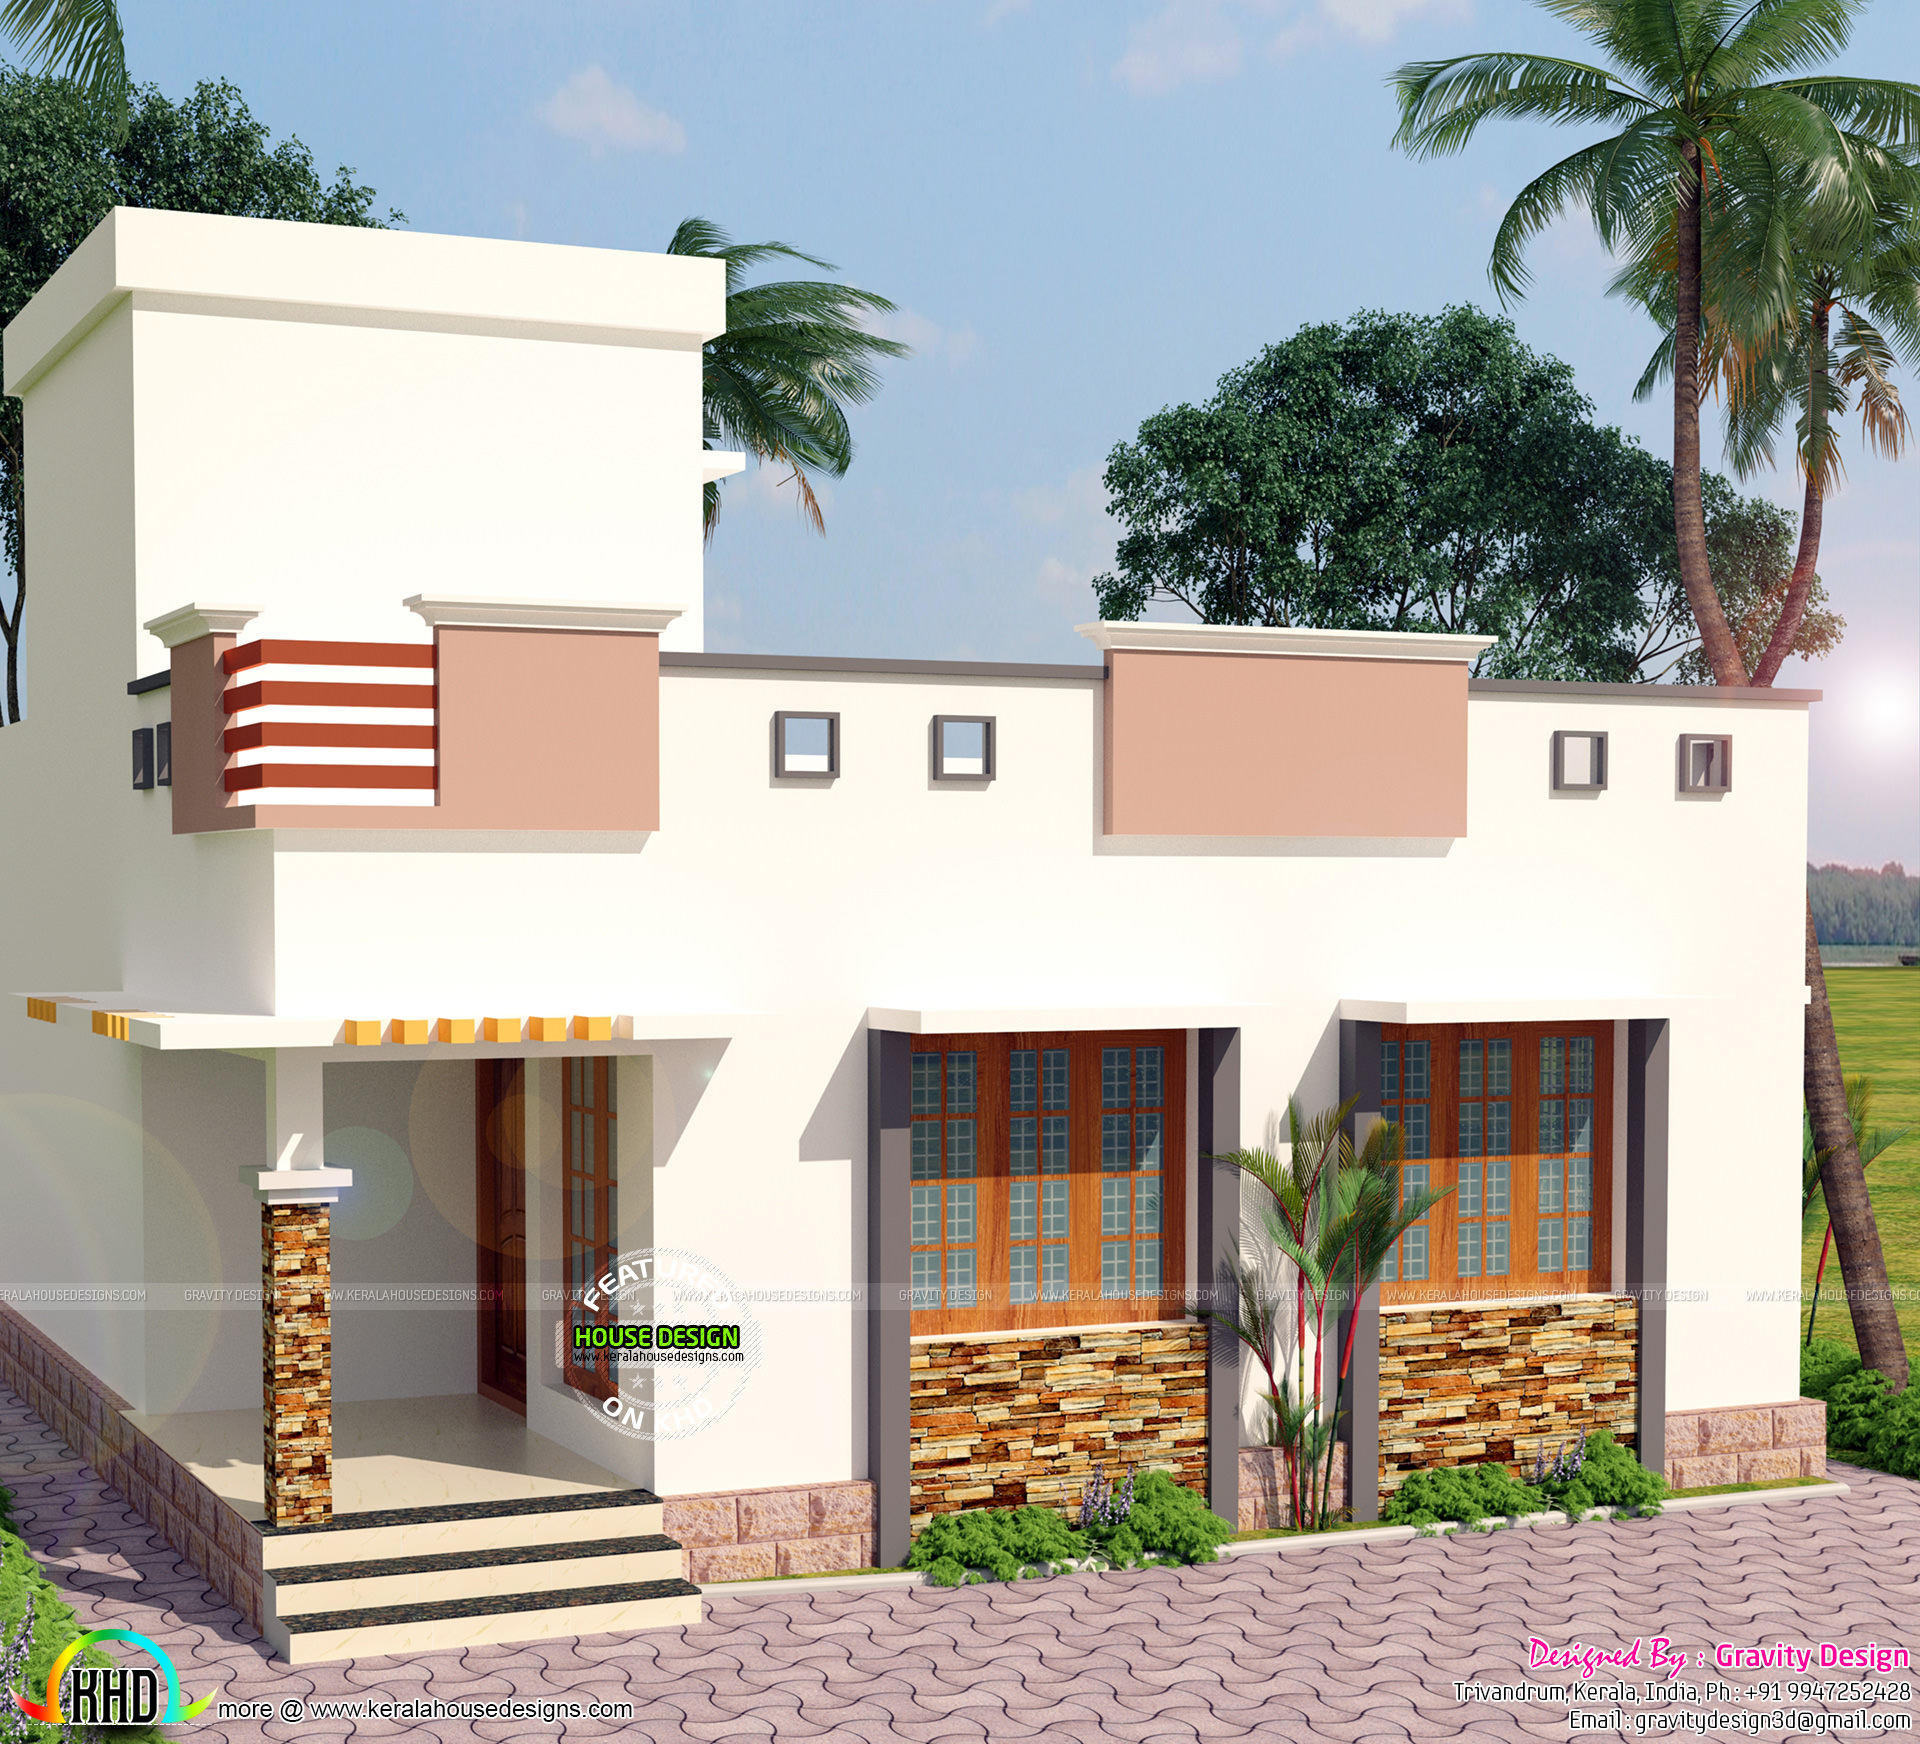  900  sq  ft  2 bedroom modern home  Kerala  home  design  and 